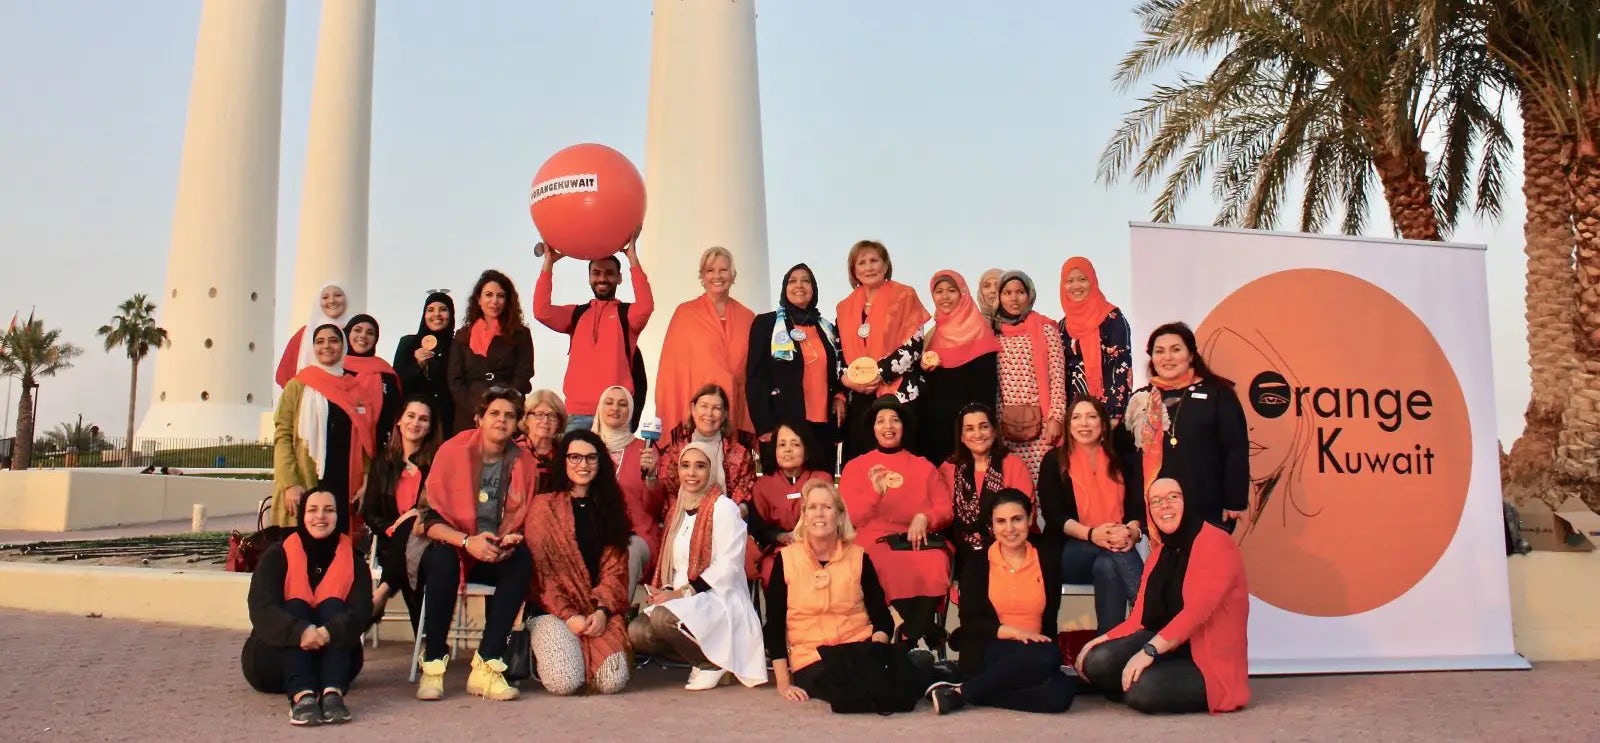 Orange Q8 2021 - The Orange Team won Best Practices Project for its "I Stand With Her" program from Soroptimist International Europe